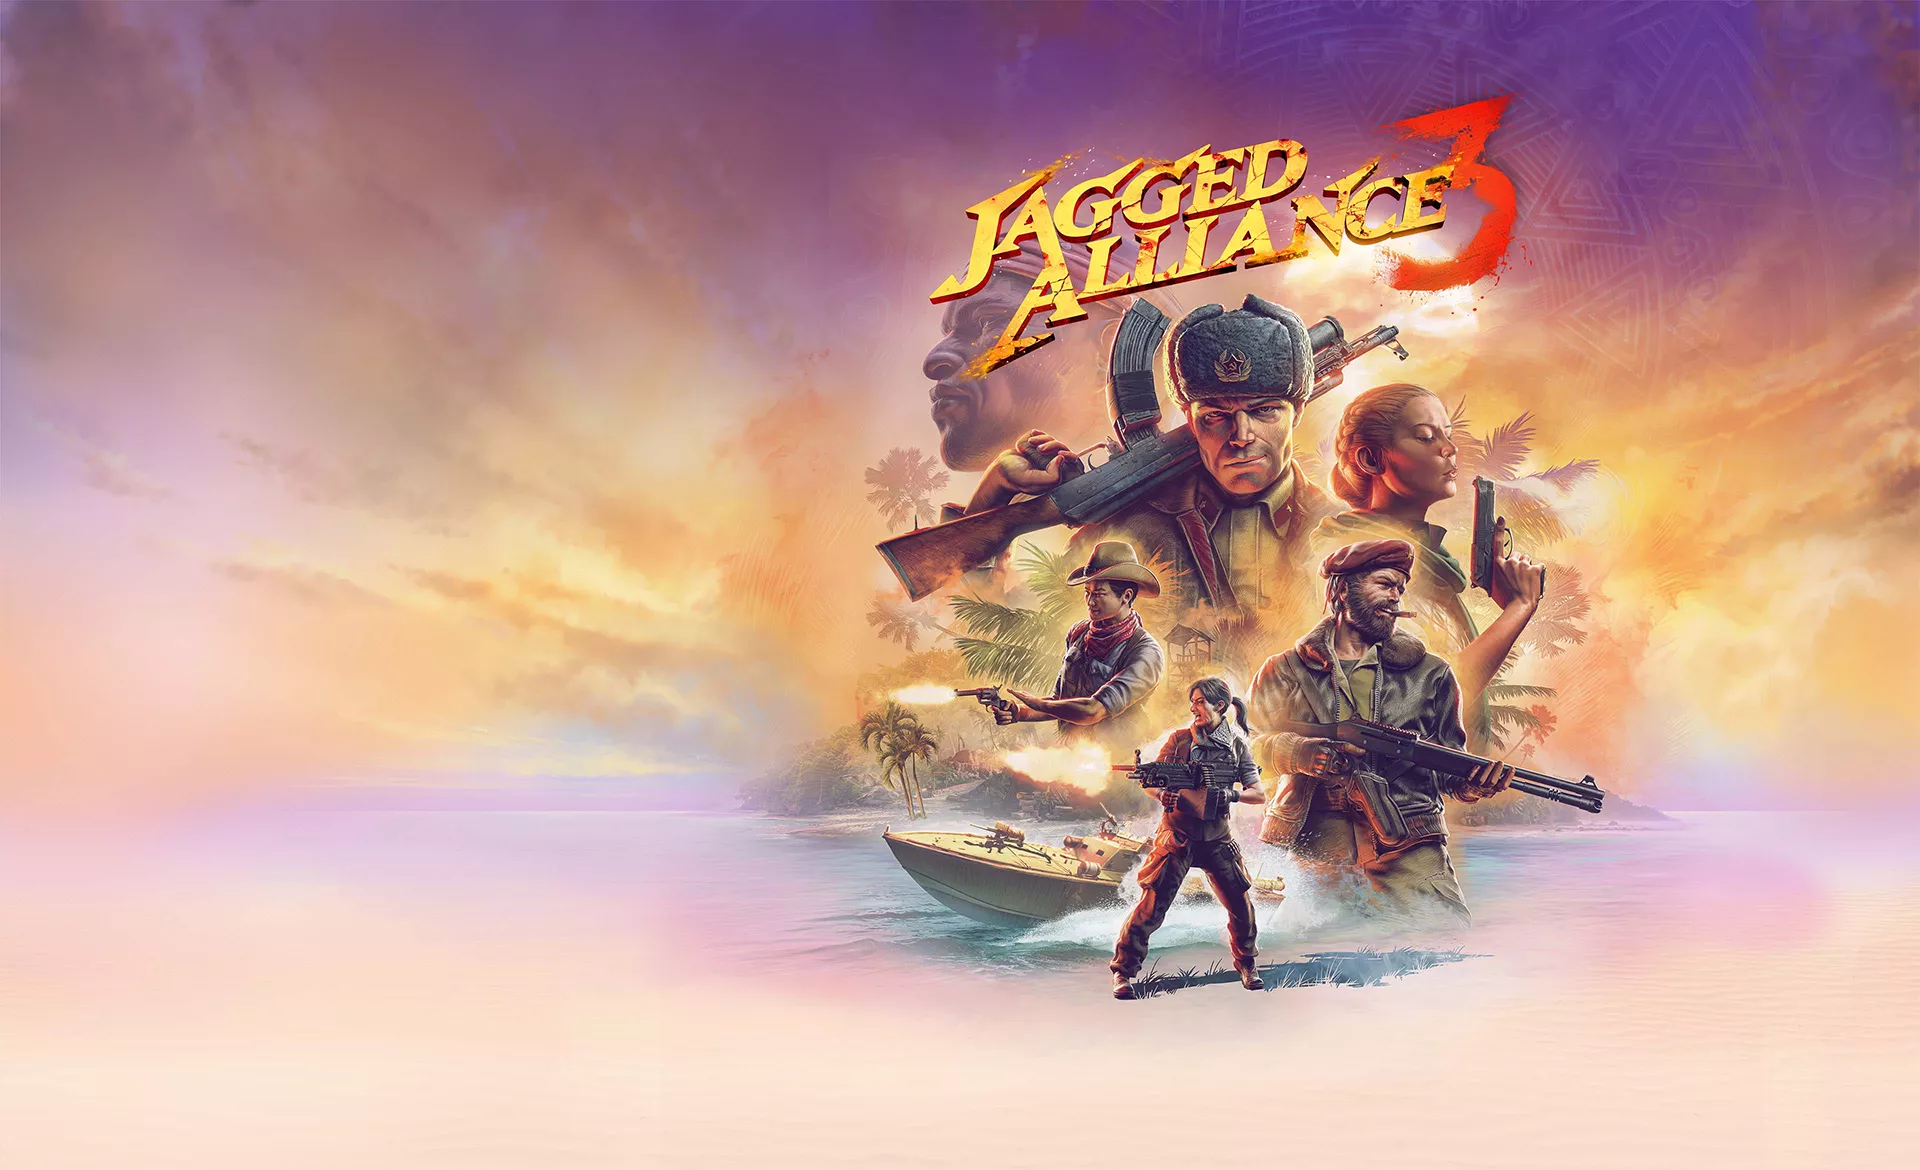 Jagged Alliance 3: The Tactical Gameplay We've Been Waiting For